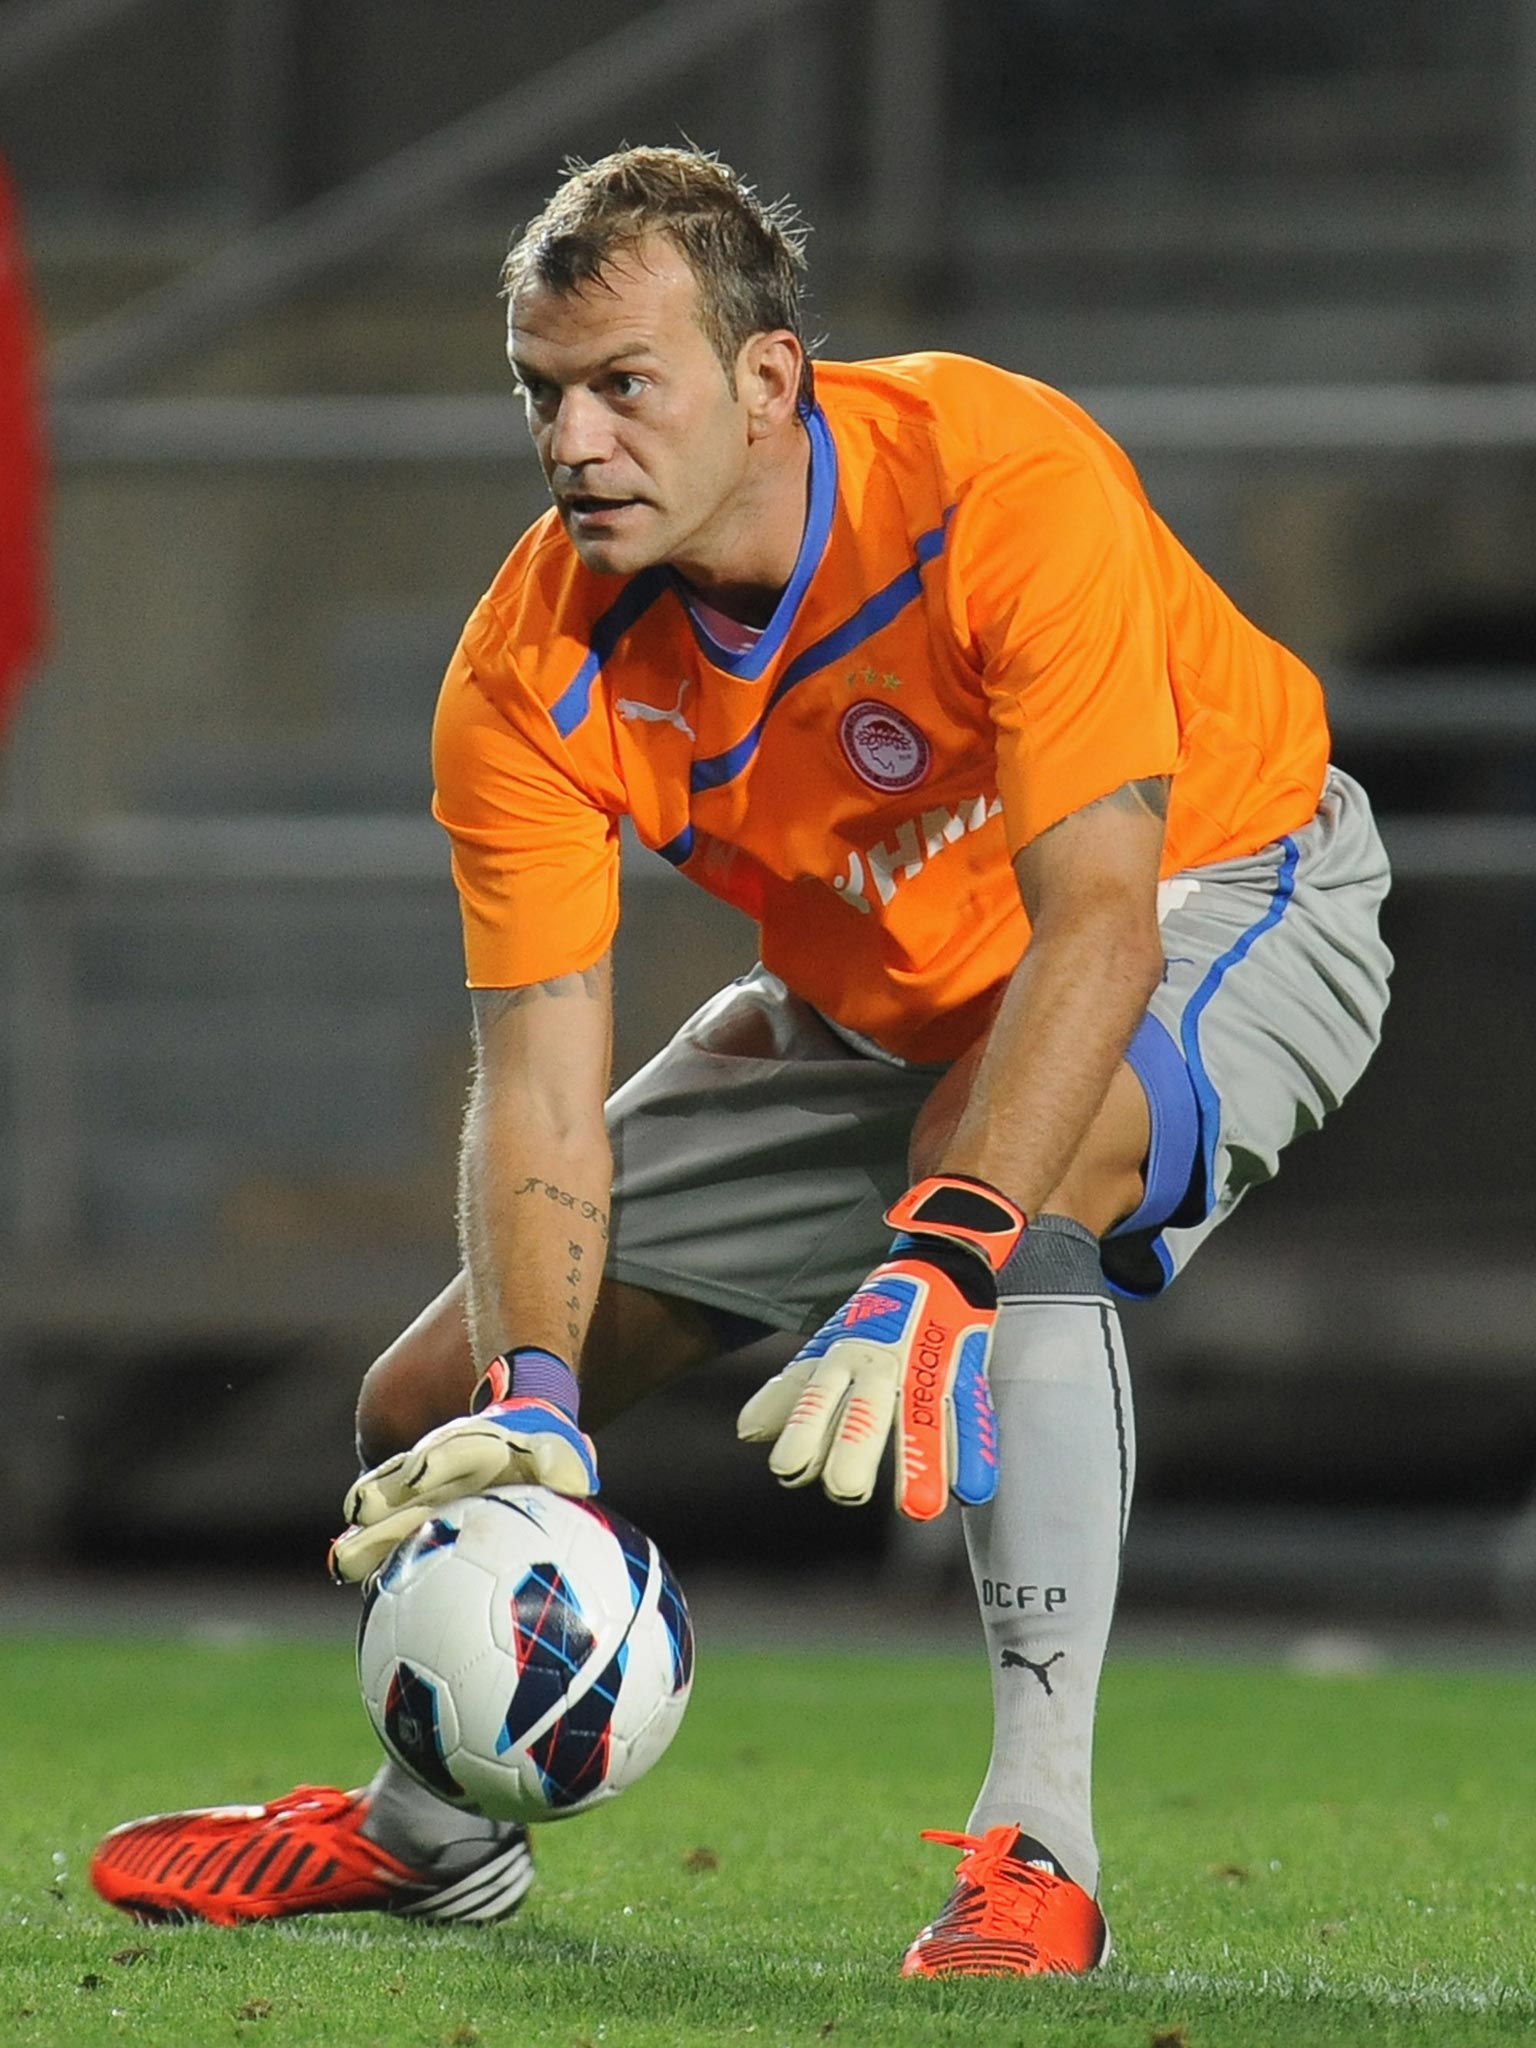 Roy Carroll has been with Olympiakos for two years after taking a chance on a trial with OFI Crete in 2011